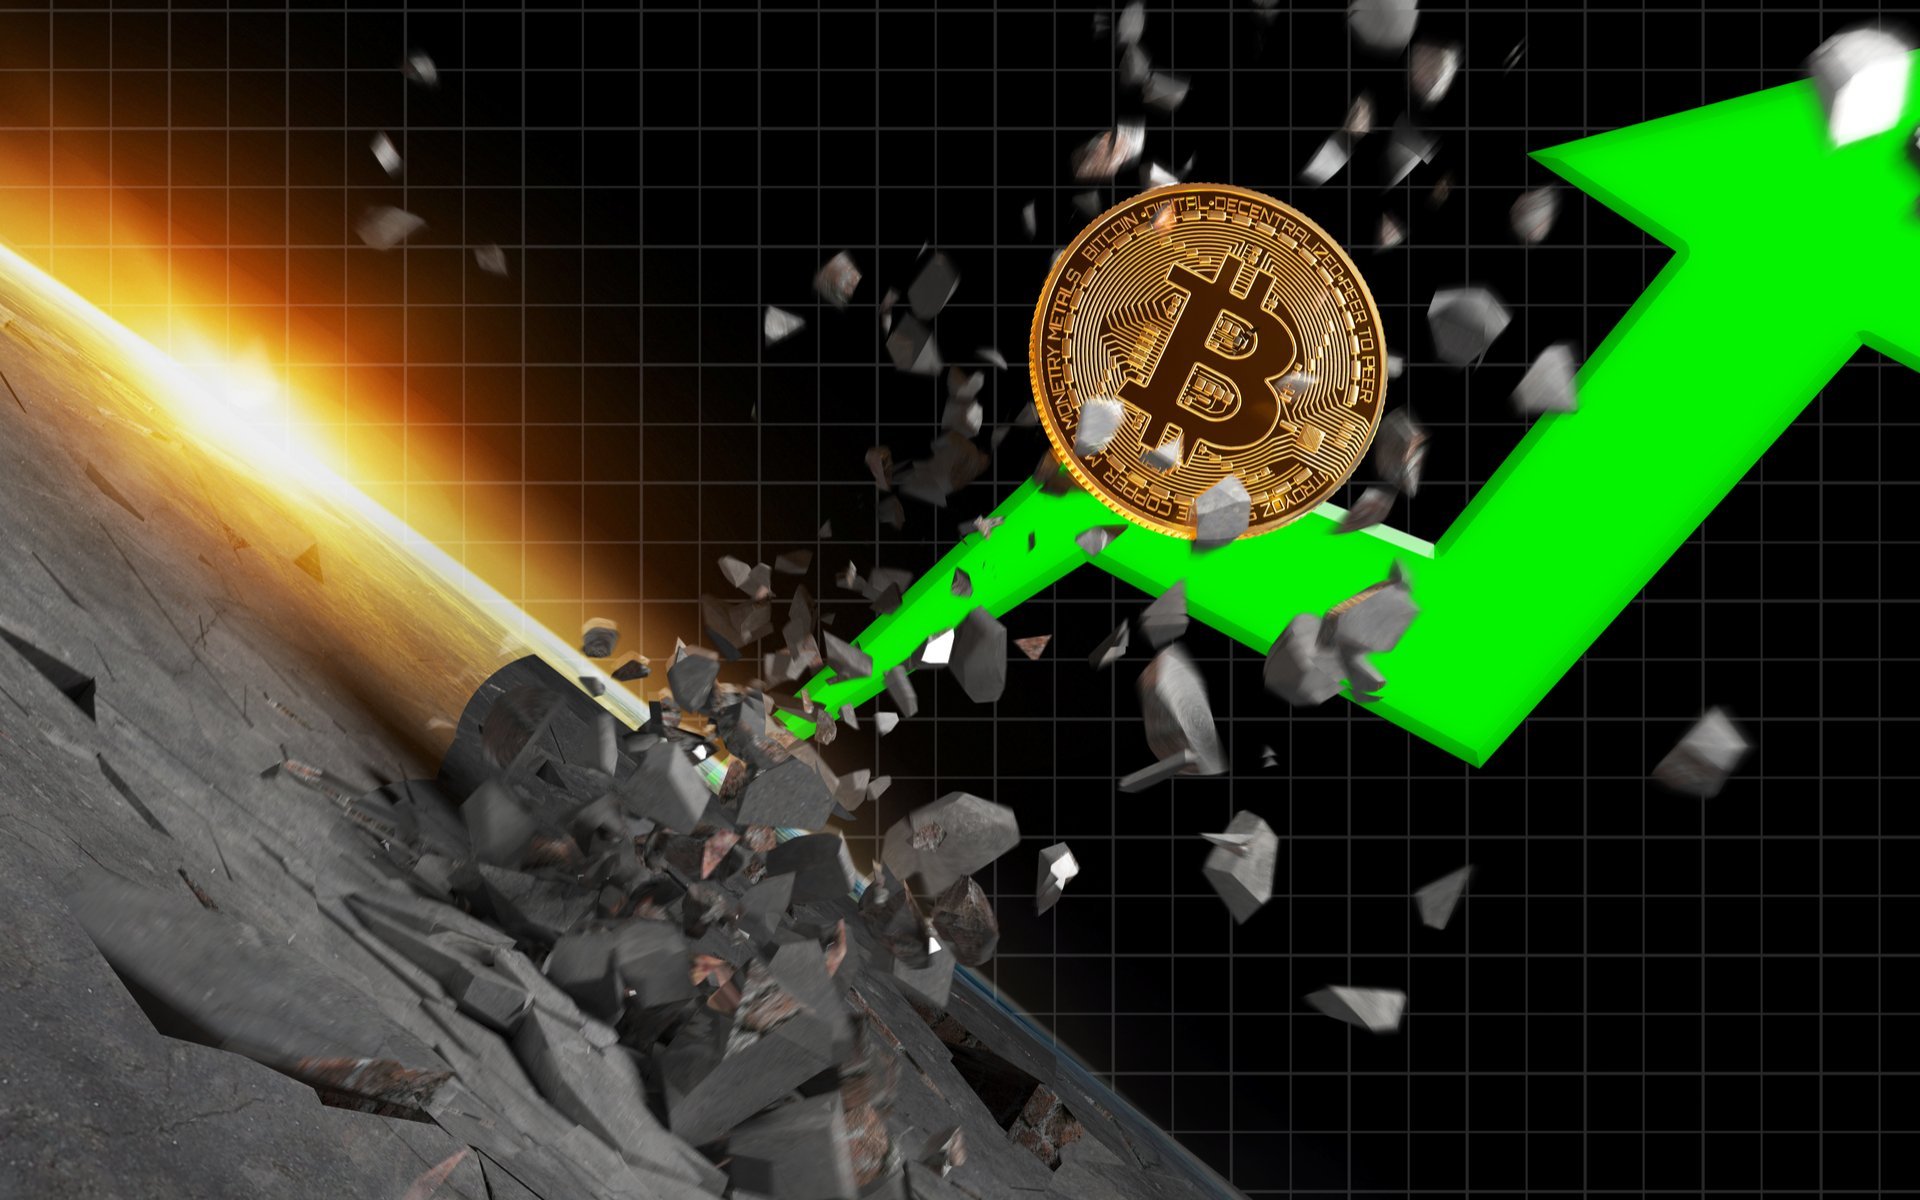 Bitcoin Price To Reach 60 000 In 2018 Cryptocurrency Expert - 